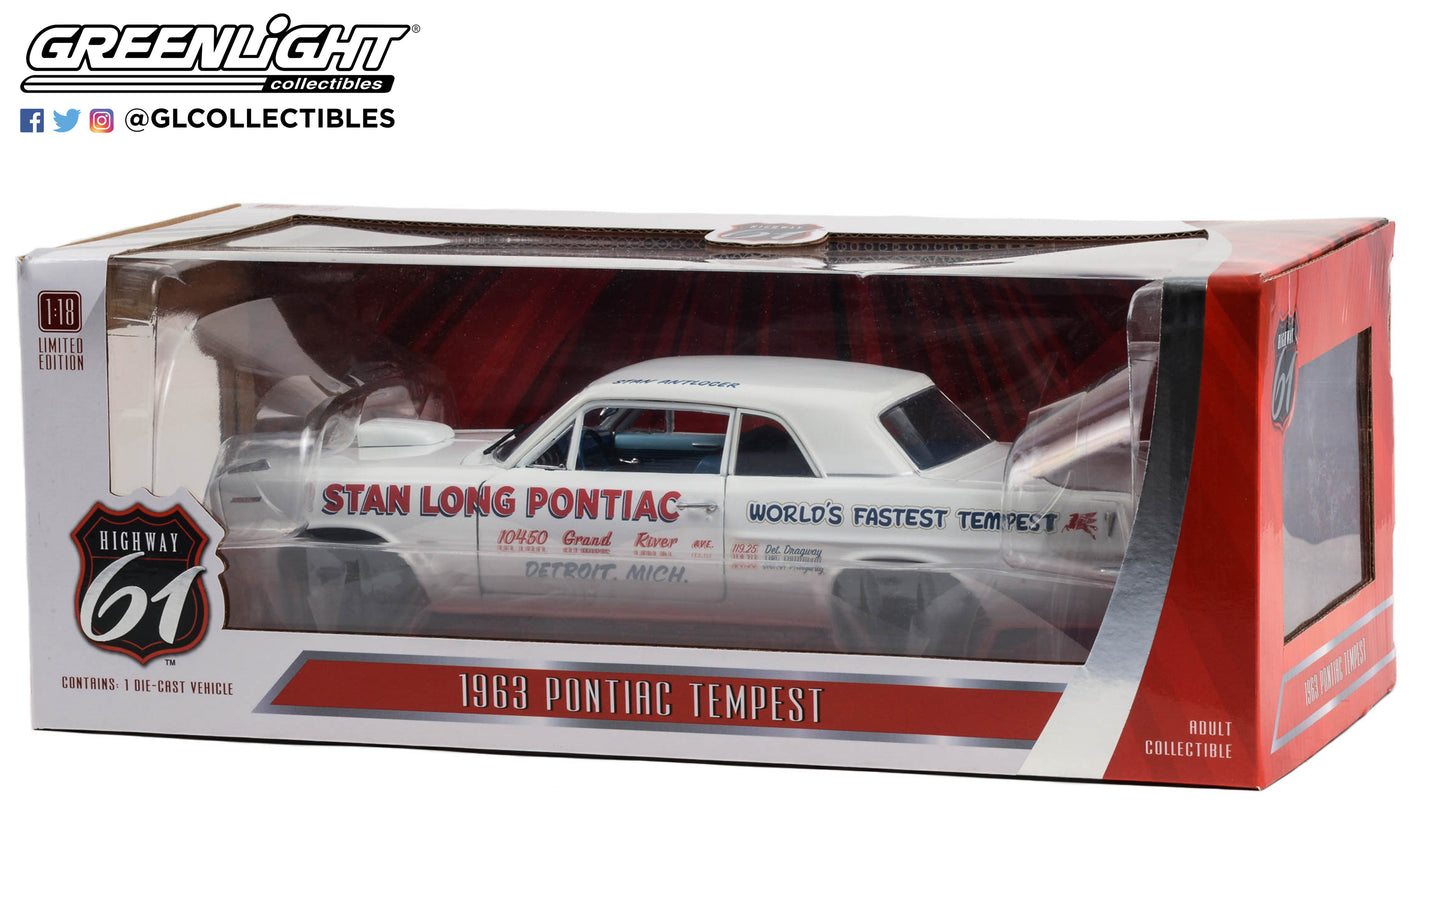 Highway 61 1:18 1963 Pontiac Tempest - Stan Long Pontiac, Detroit, Michigan World s Fastest Tempest - Driven by Stan Antlocer HWY-18041